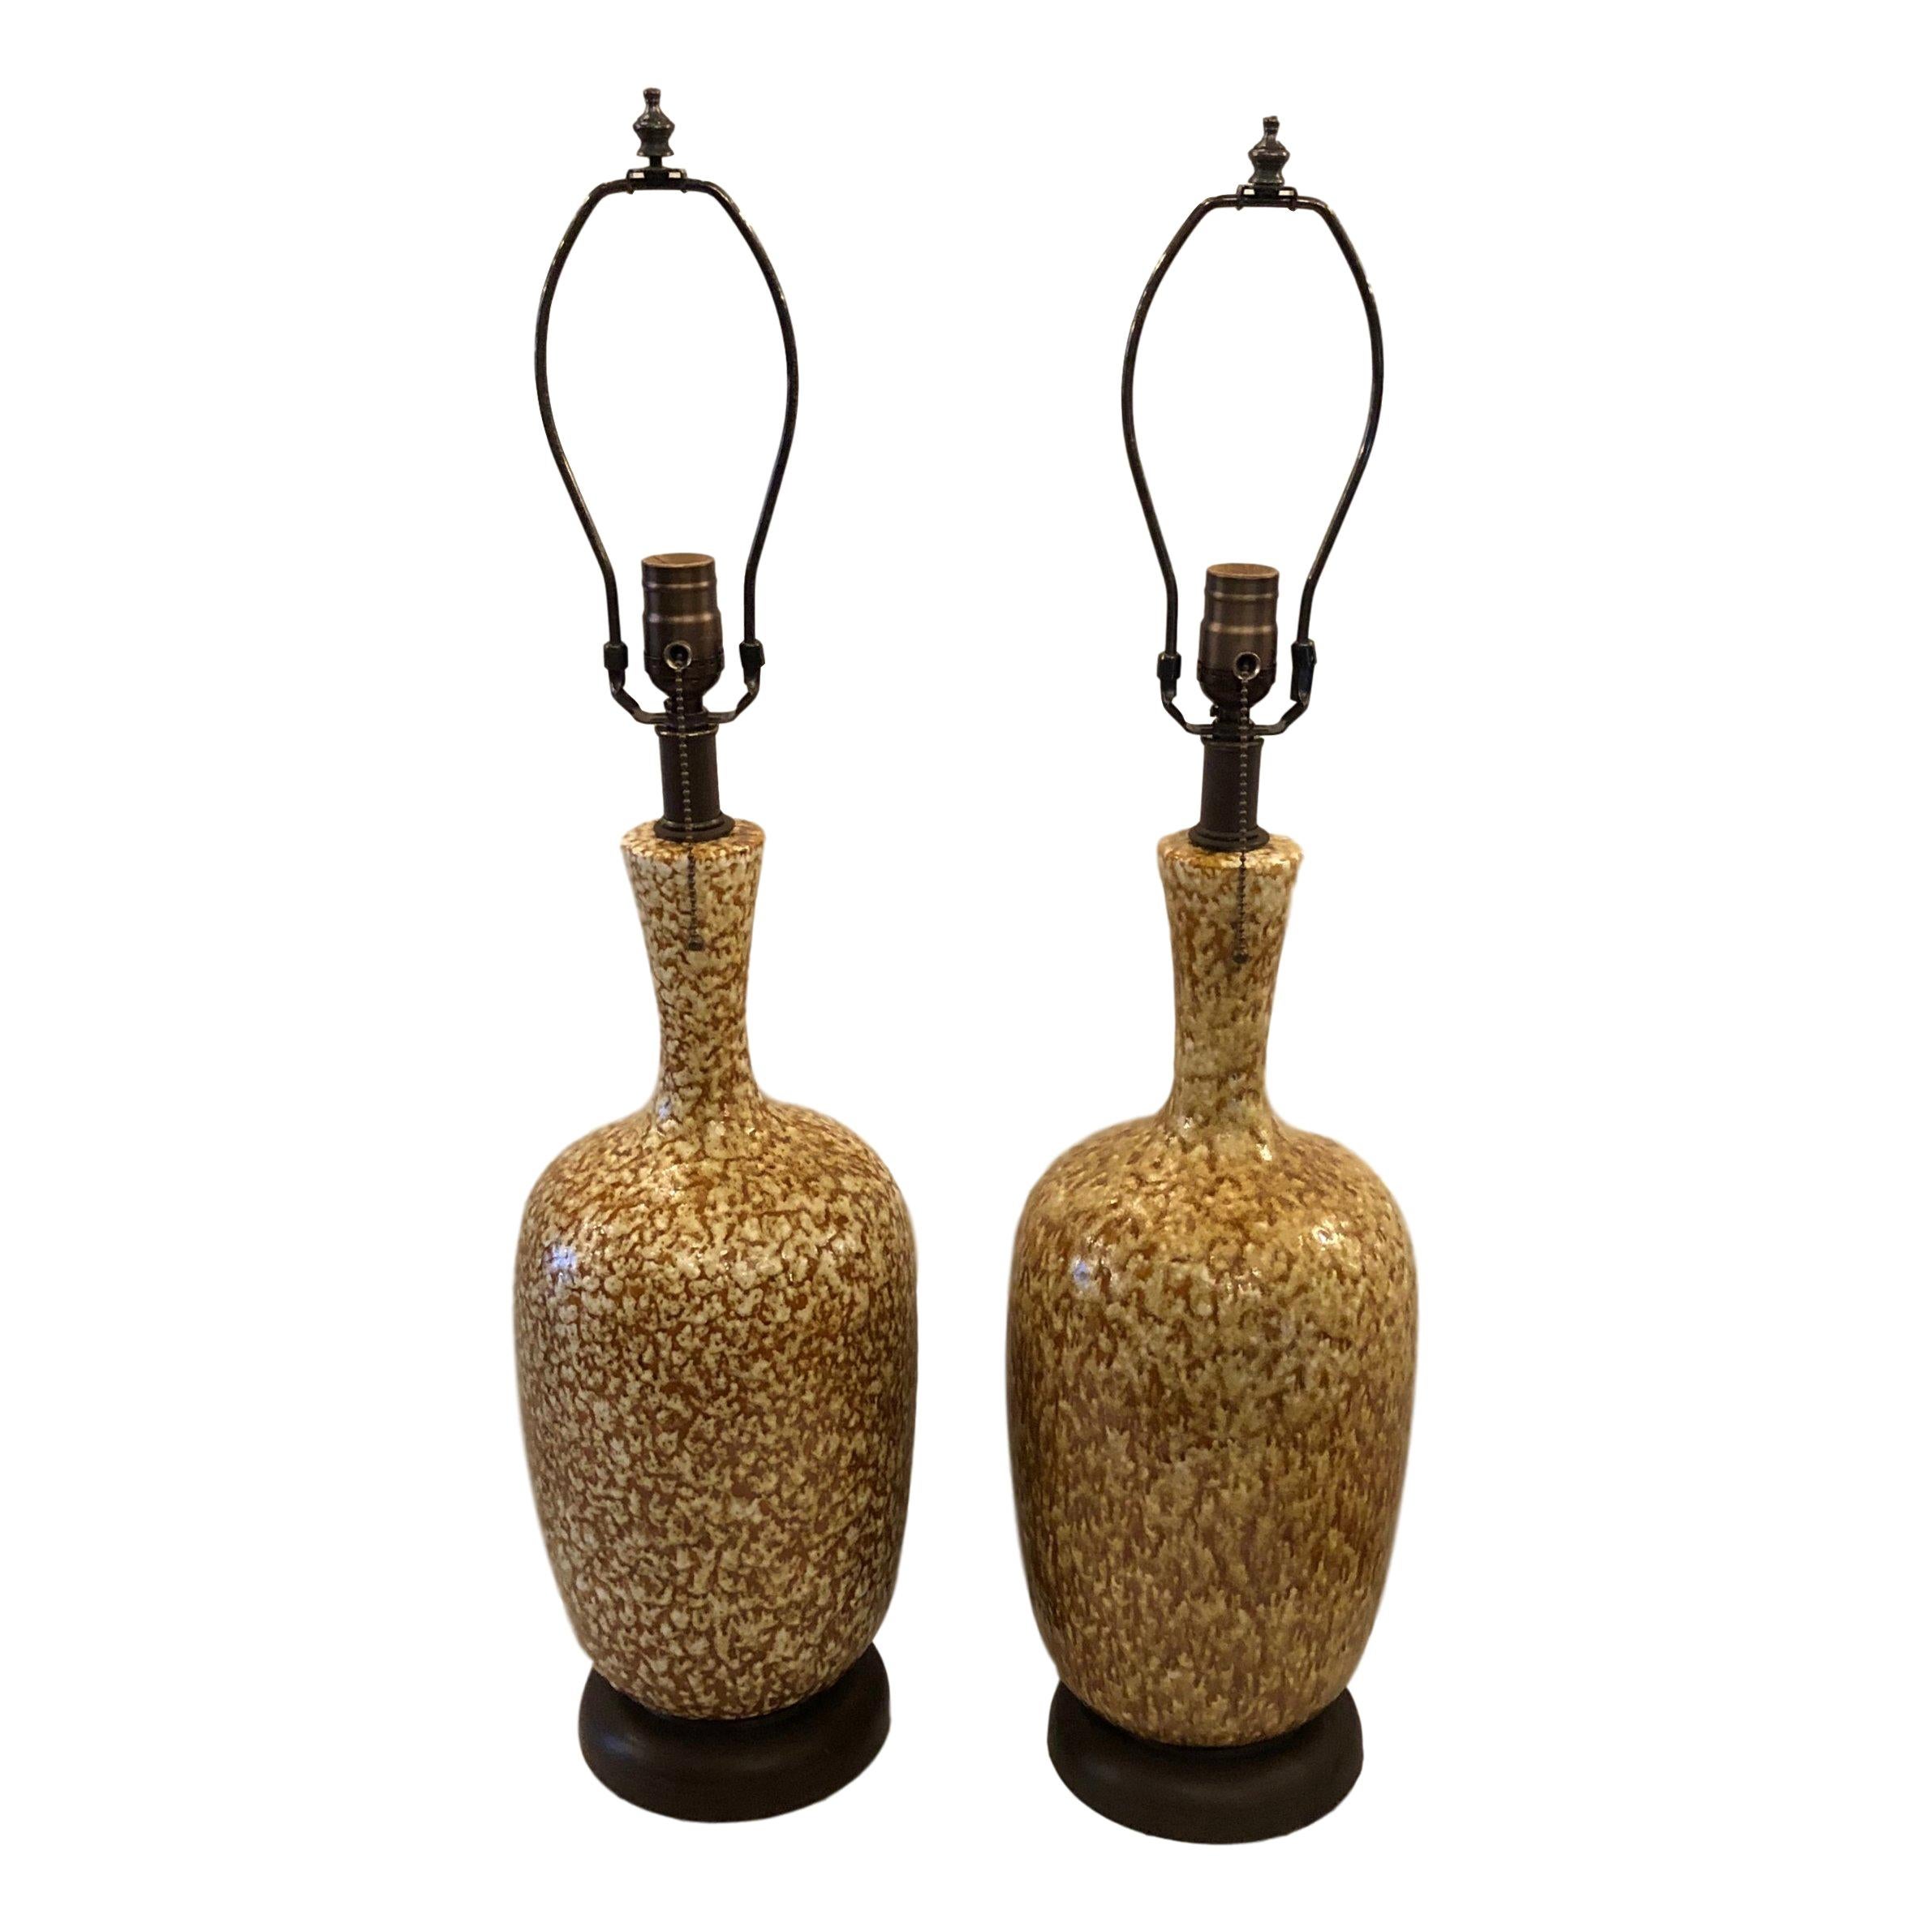 Pair of Glazed Ceramic Table Lamps